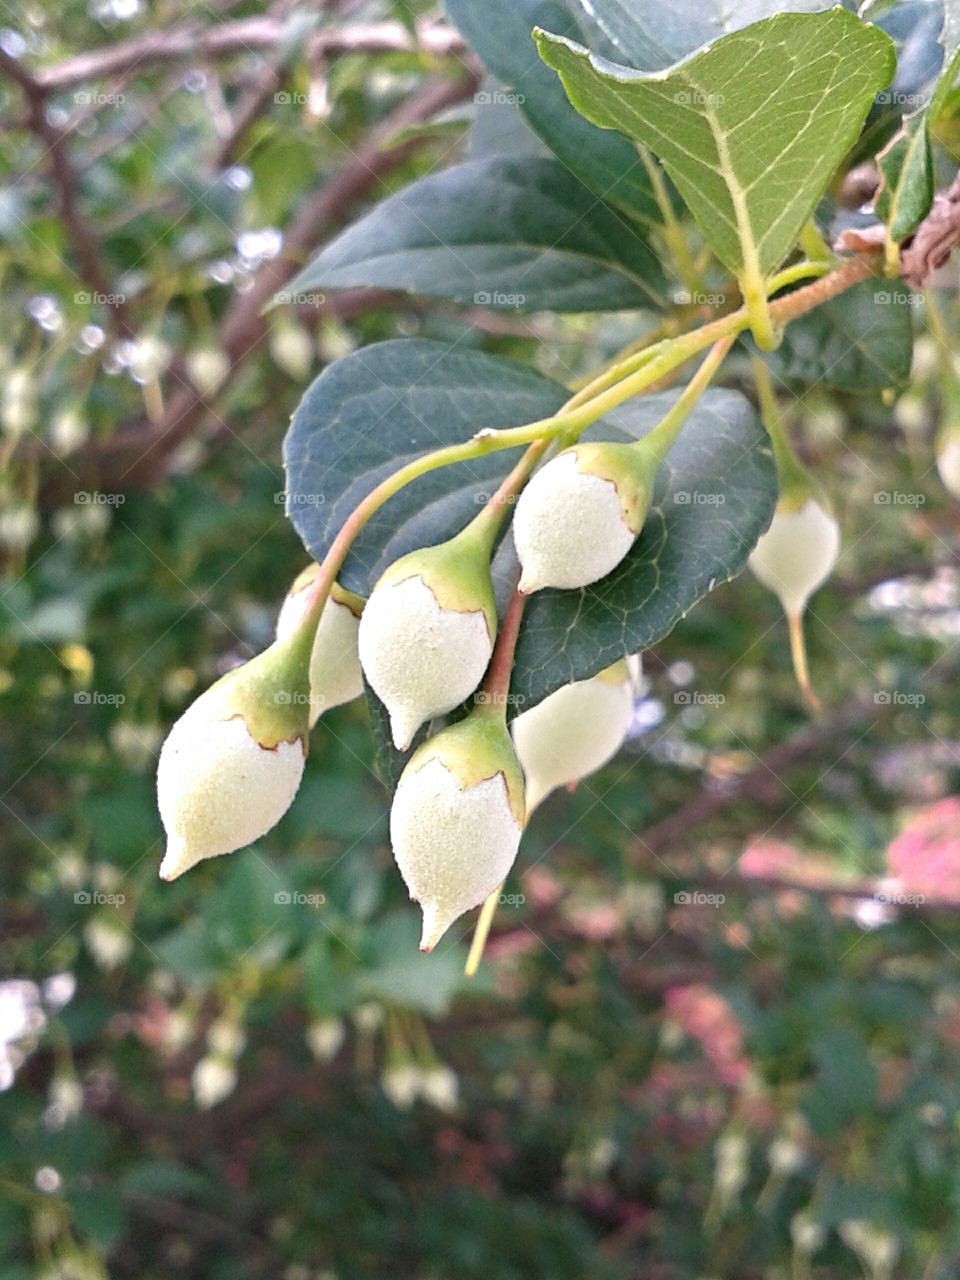 Tree fruits. A cluster of berry fruits after the blooms fall.